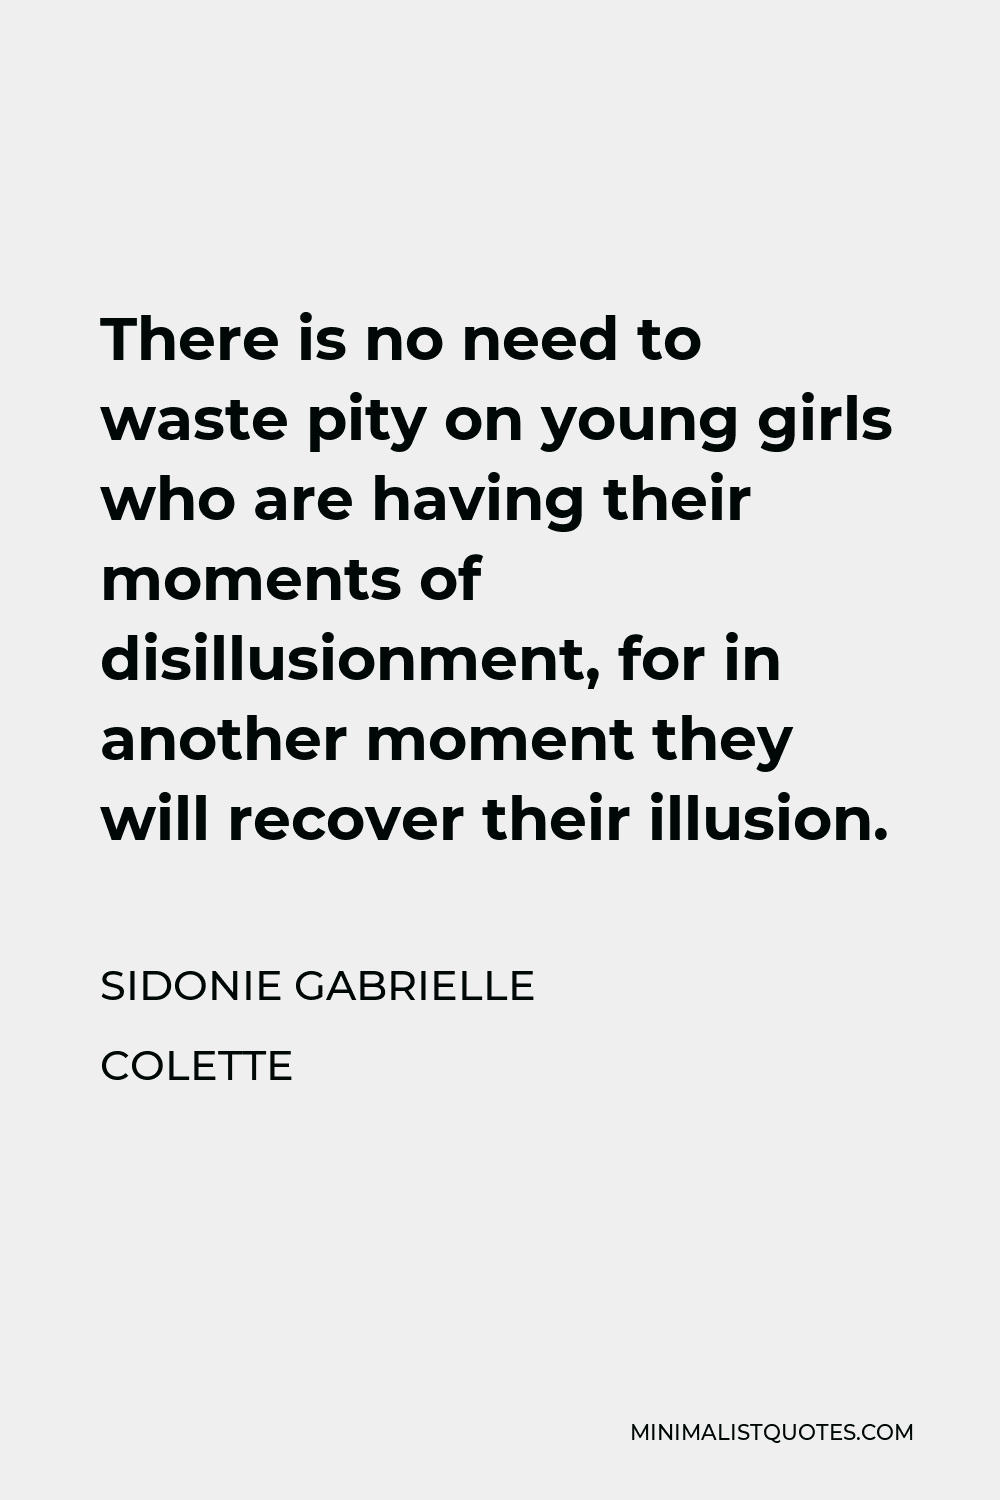 Sidonie Gabrielle Colette Quote - There is no need to waste pity on young girls who are having their moments of disillusionment, for in another moment they will recover their illusion.